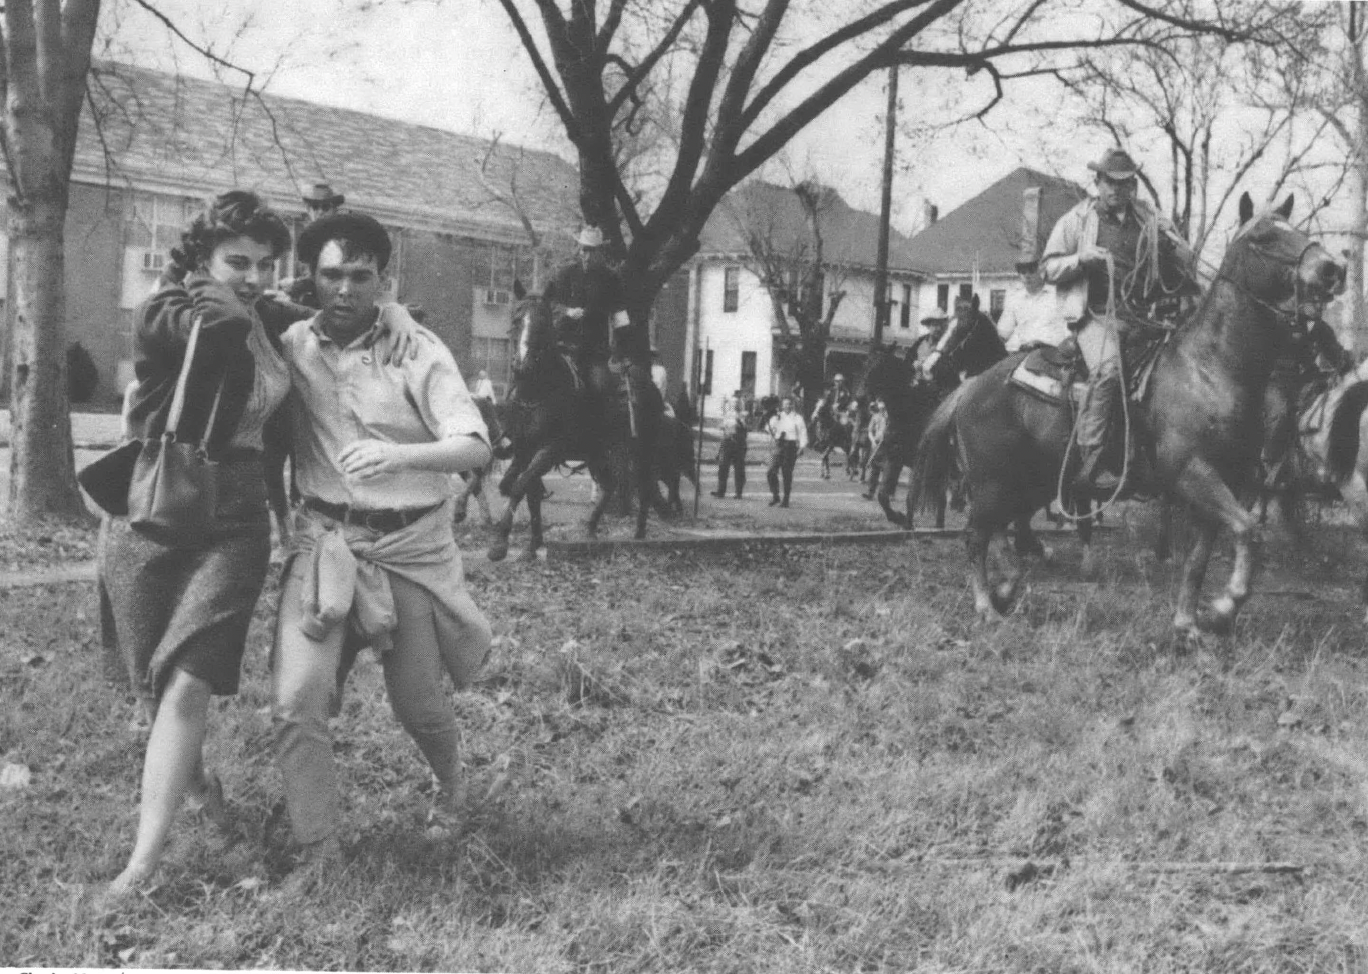 Black and white photo of people running from cops on horseback in a neighborhood